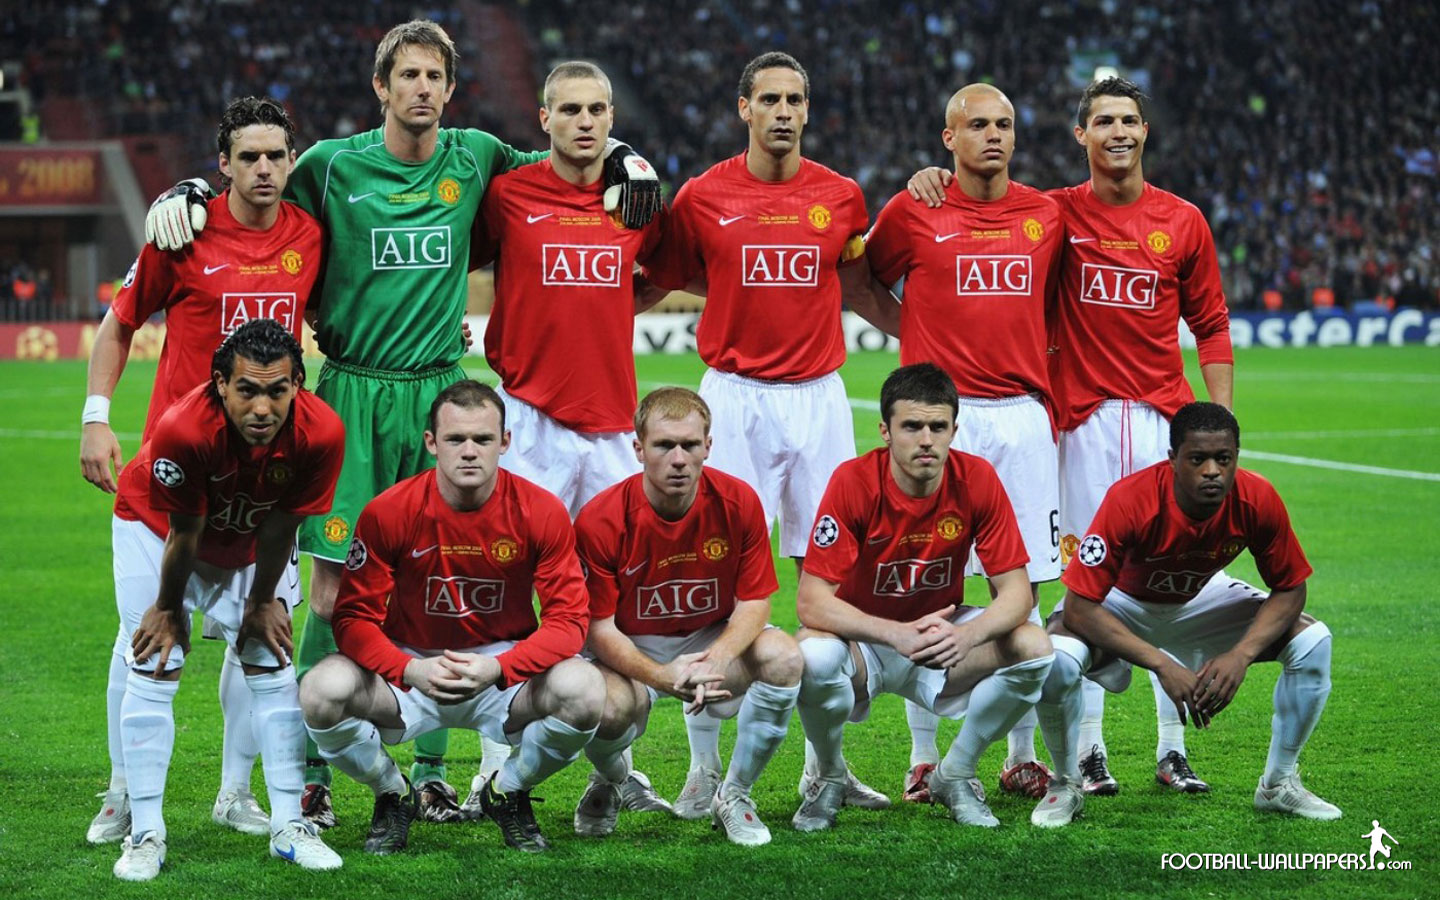 My World in Pictures &amp; Words: Favourite Football Team - Manchester United